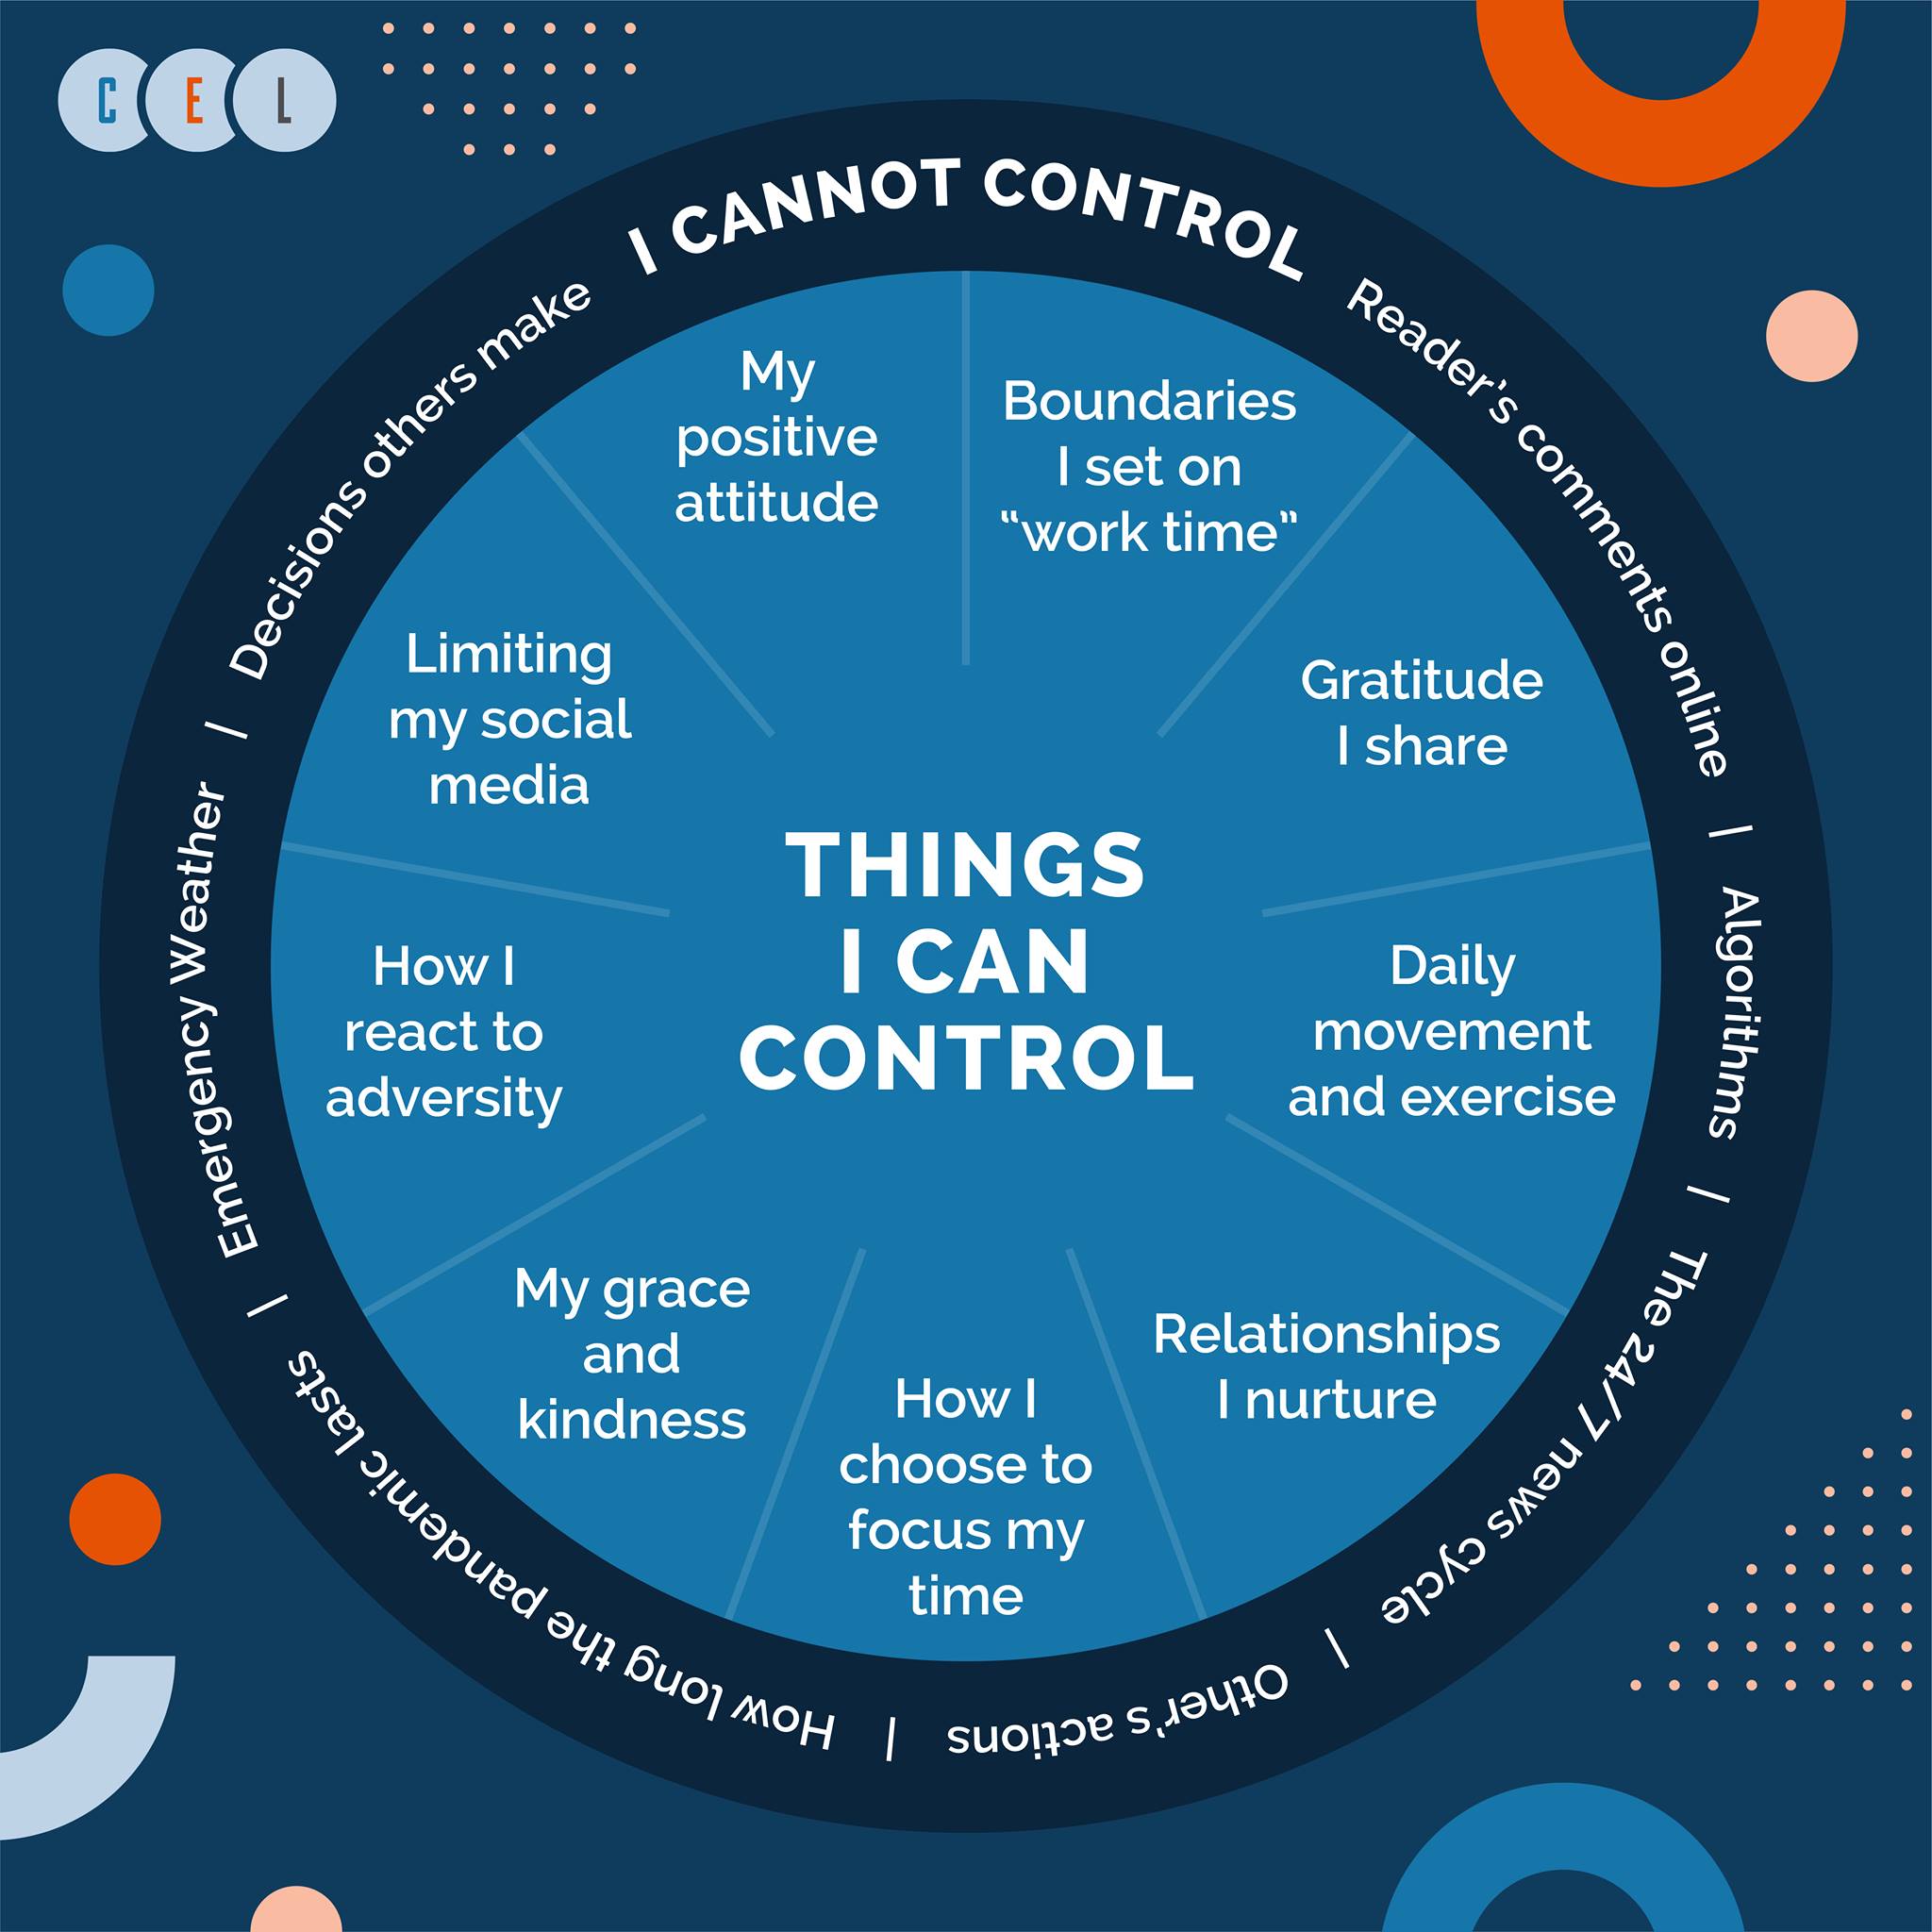 Things I can control and Things I can't control